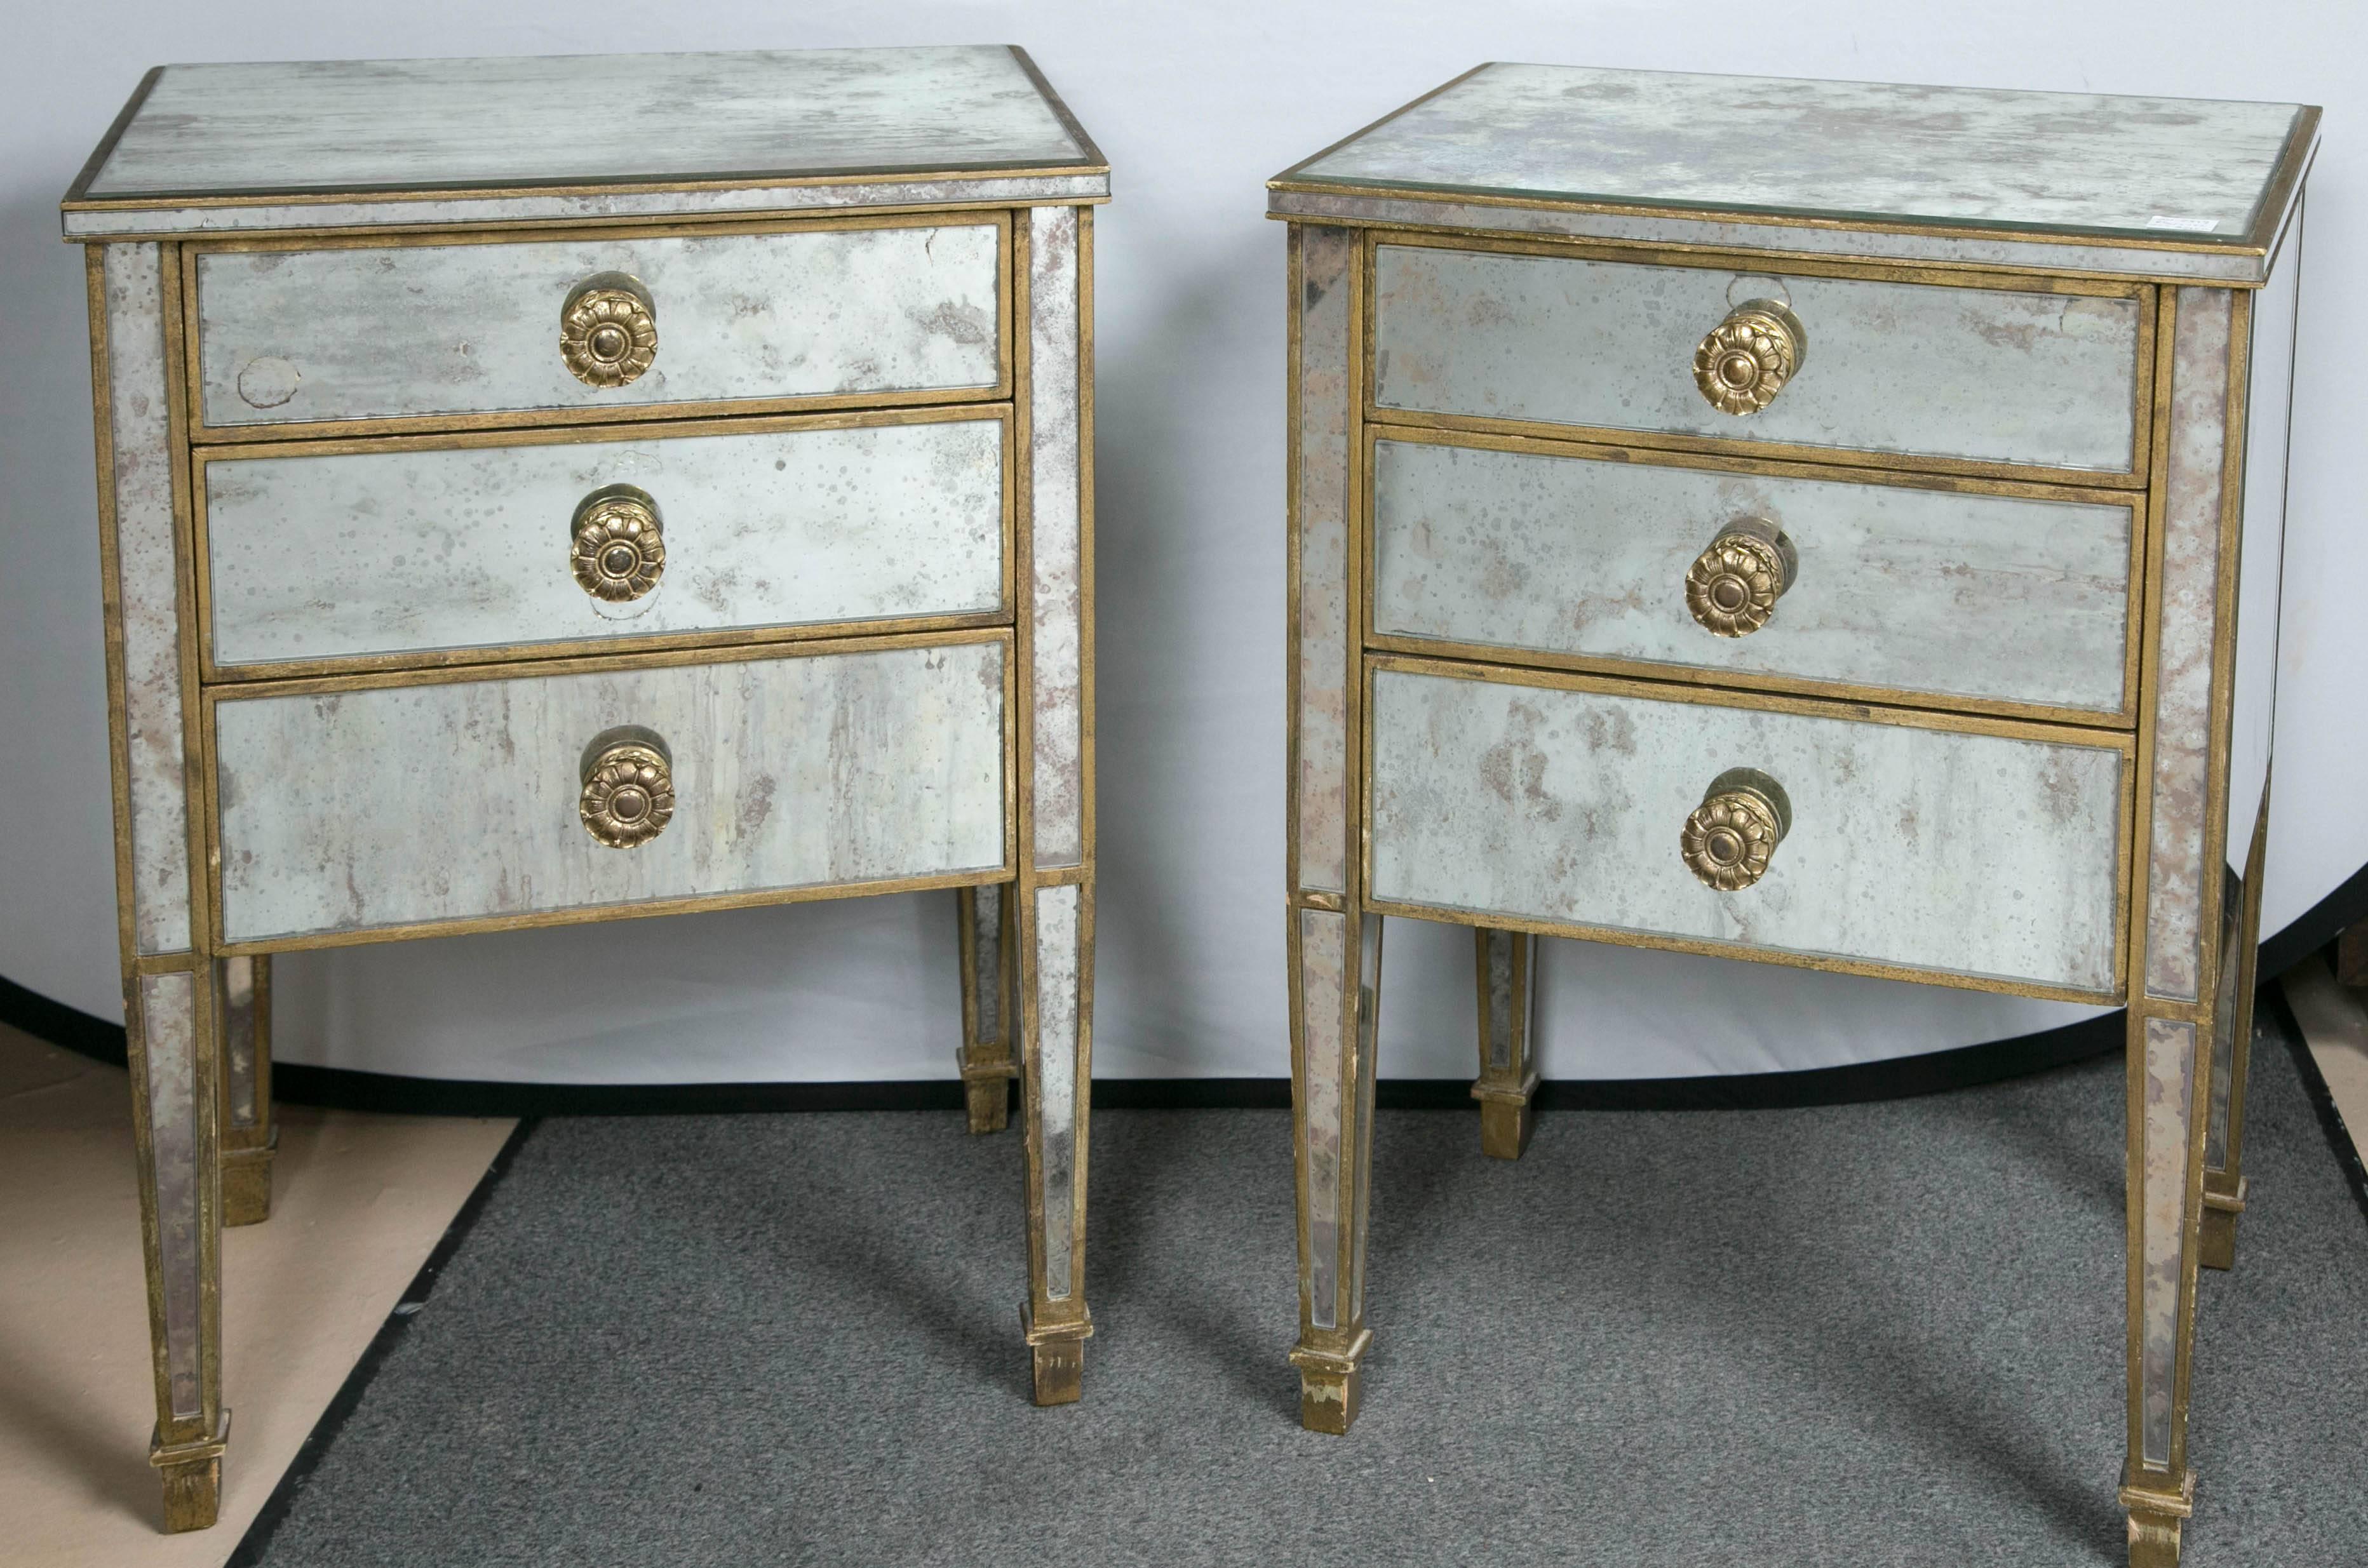 A pair of Regency mirrored night / end tables each having three drawers. The antiqued mirrored case having distressed finish. This fine solid wooden pair add the allure of sleek and Hollywood Regency glamour to any area of the home.